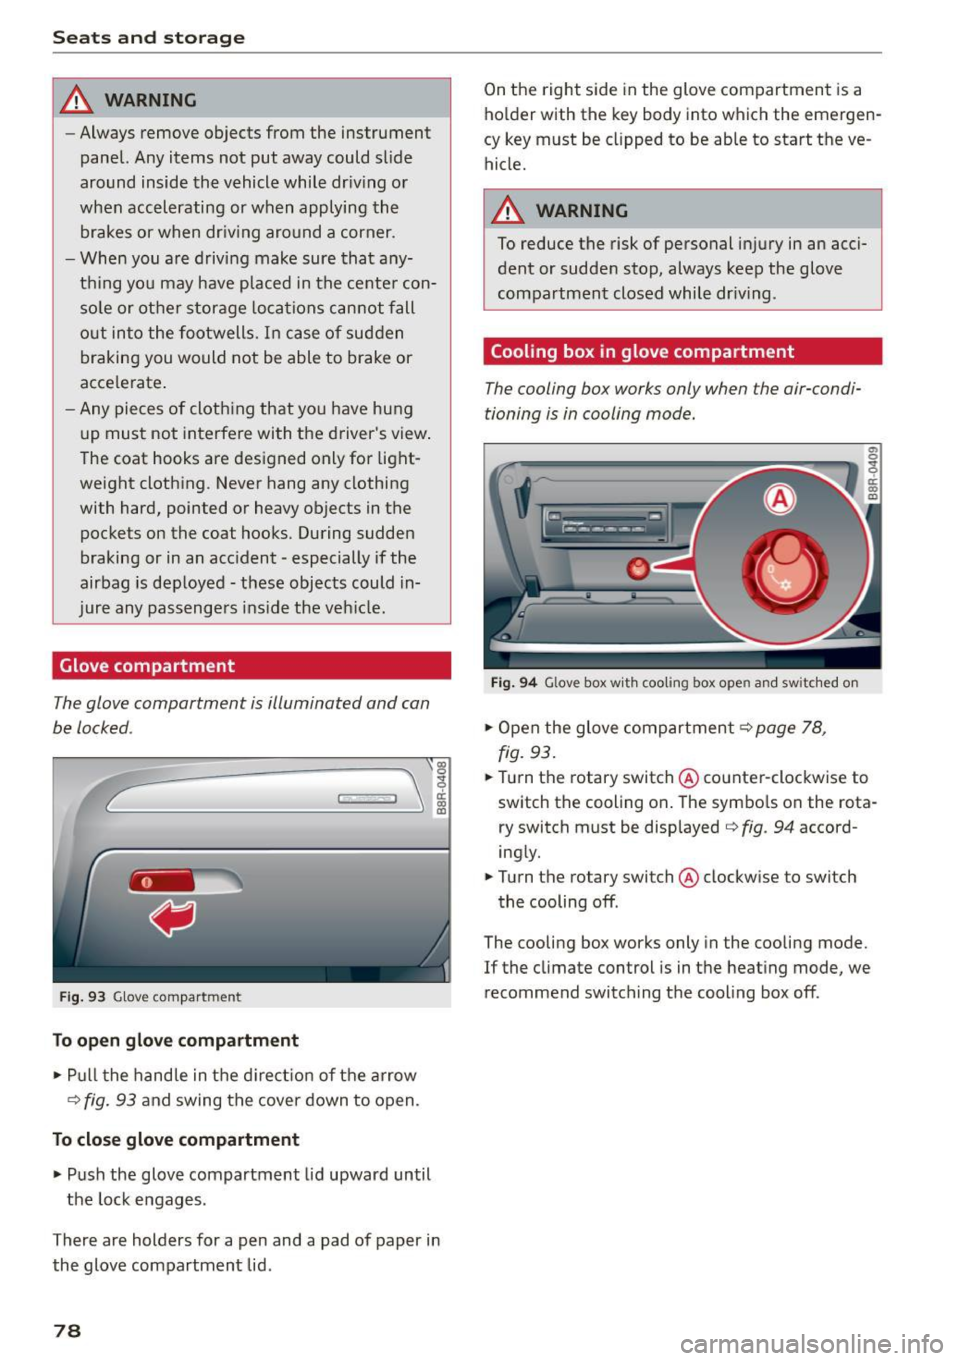 AUDI Q5 2015  Owners Manual Seats  and storag e 
_& WARNING 
-Always  remove  objects  from  the  instrument 
panel.  Any items  not  put  away  could  slide 
around  inside  the  vehicle  while  dr iving  or 
when  accelerating